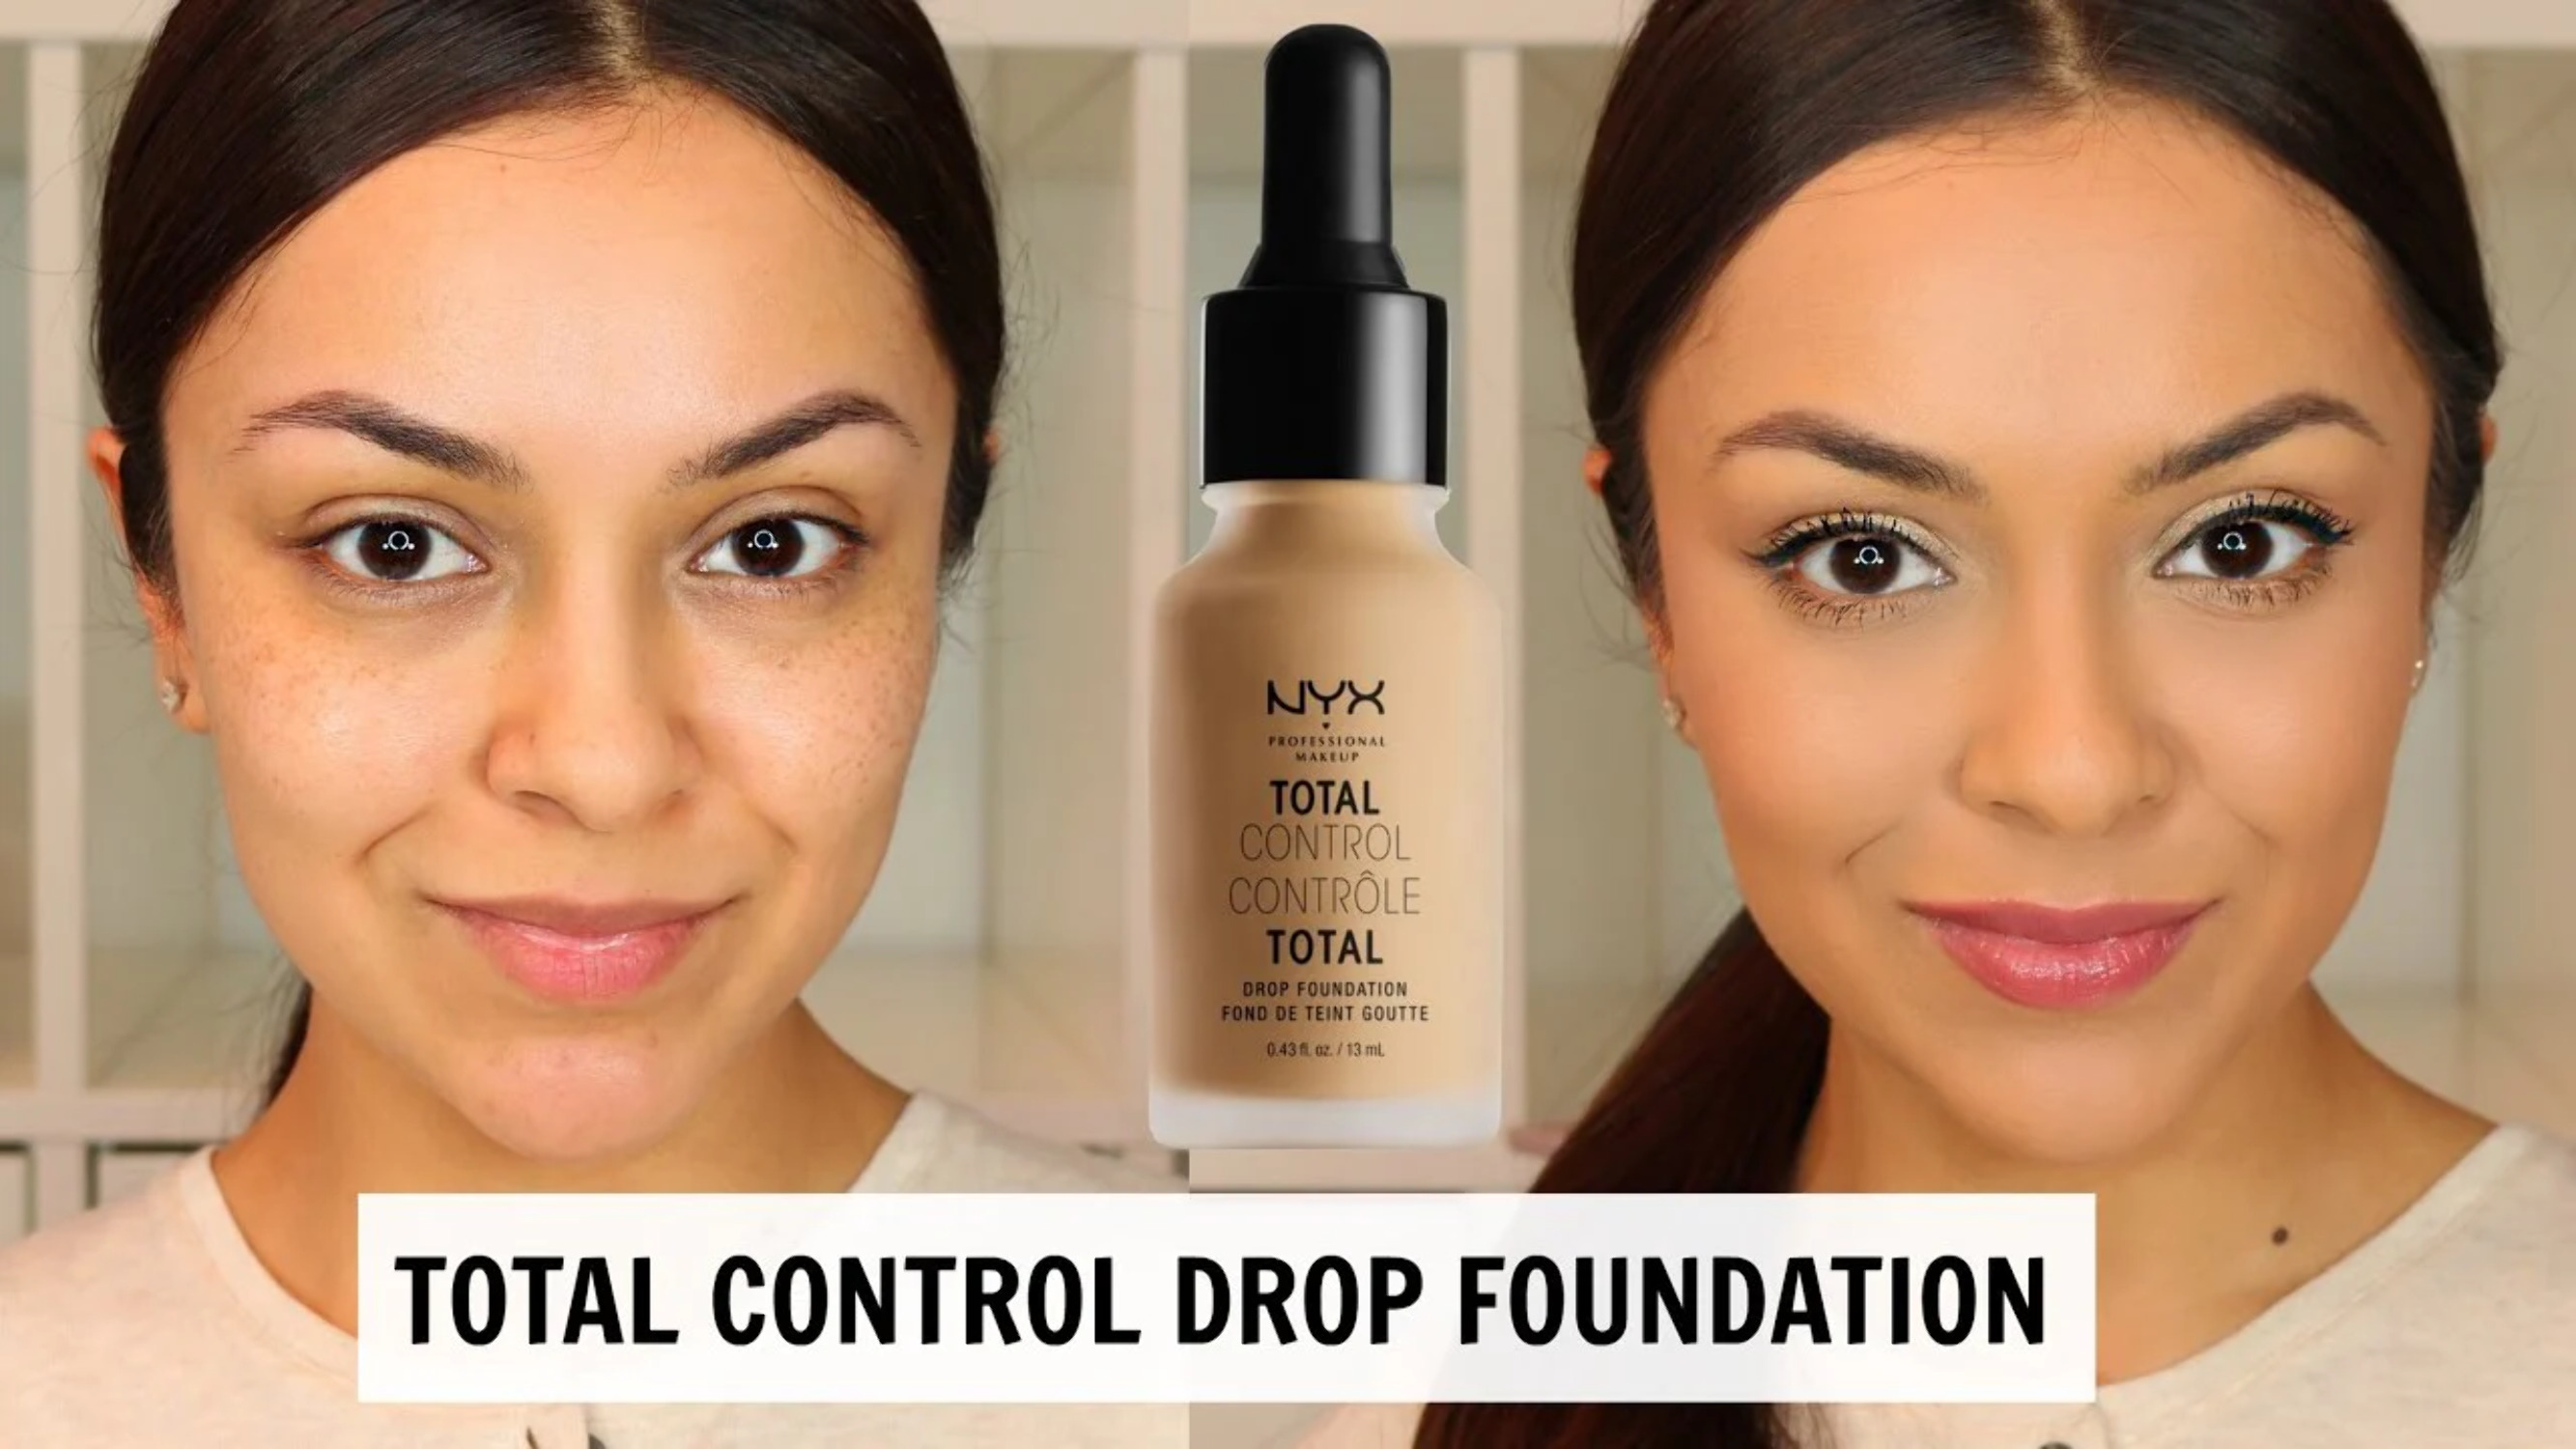 NYX Professional Makeup Total Control Drop Foundation, True Beige - image 5 of 6